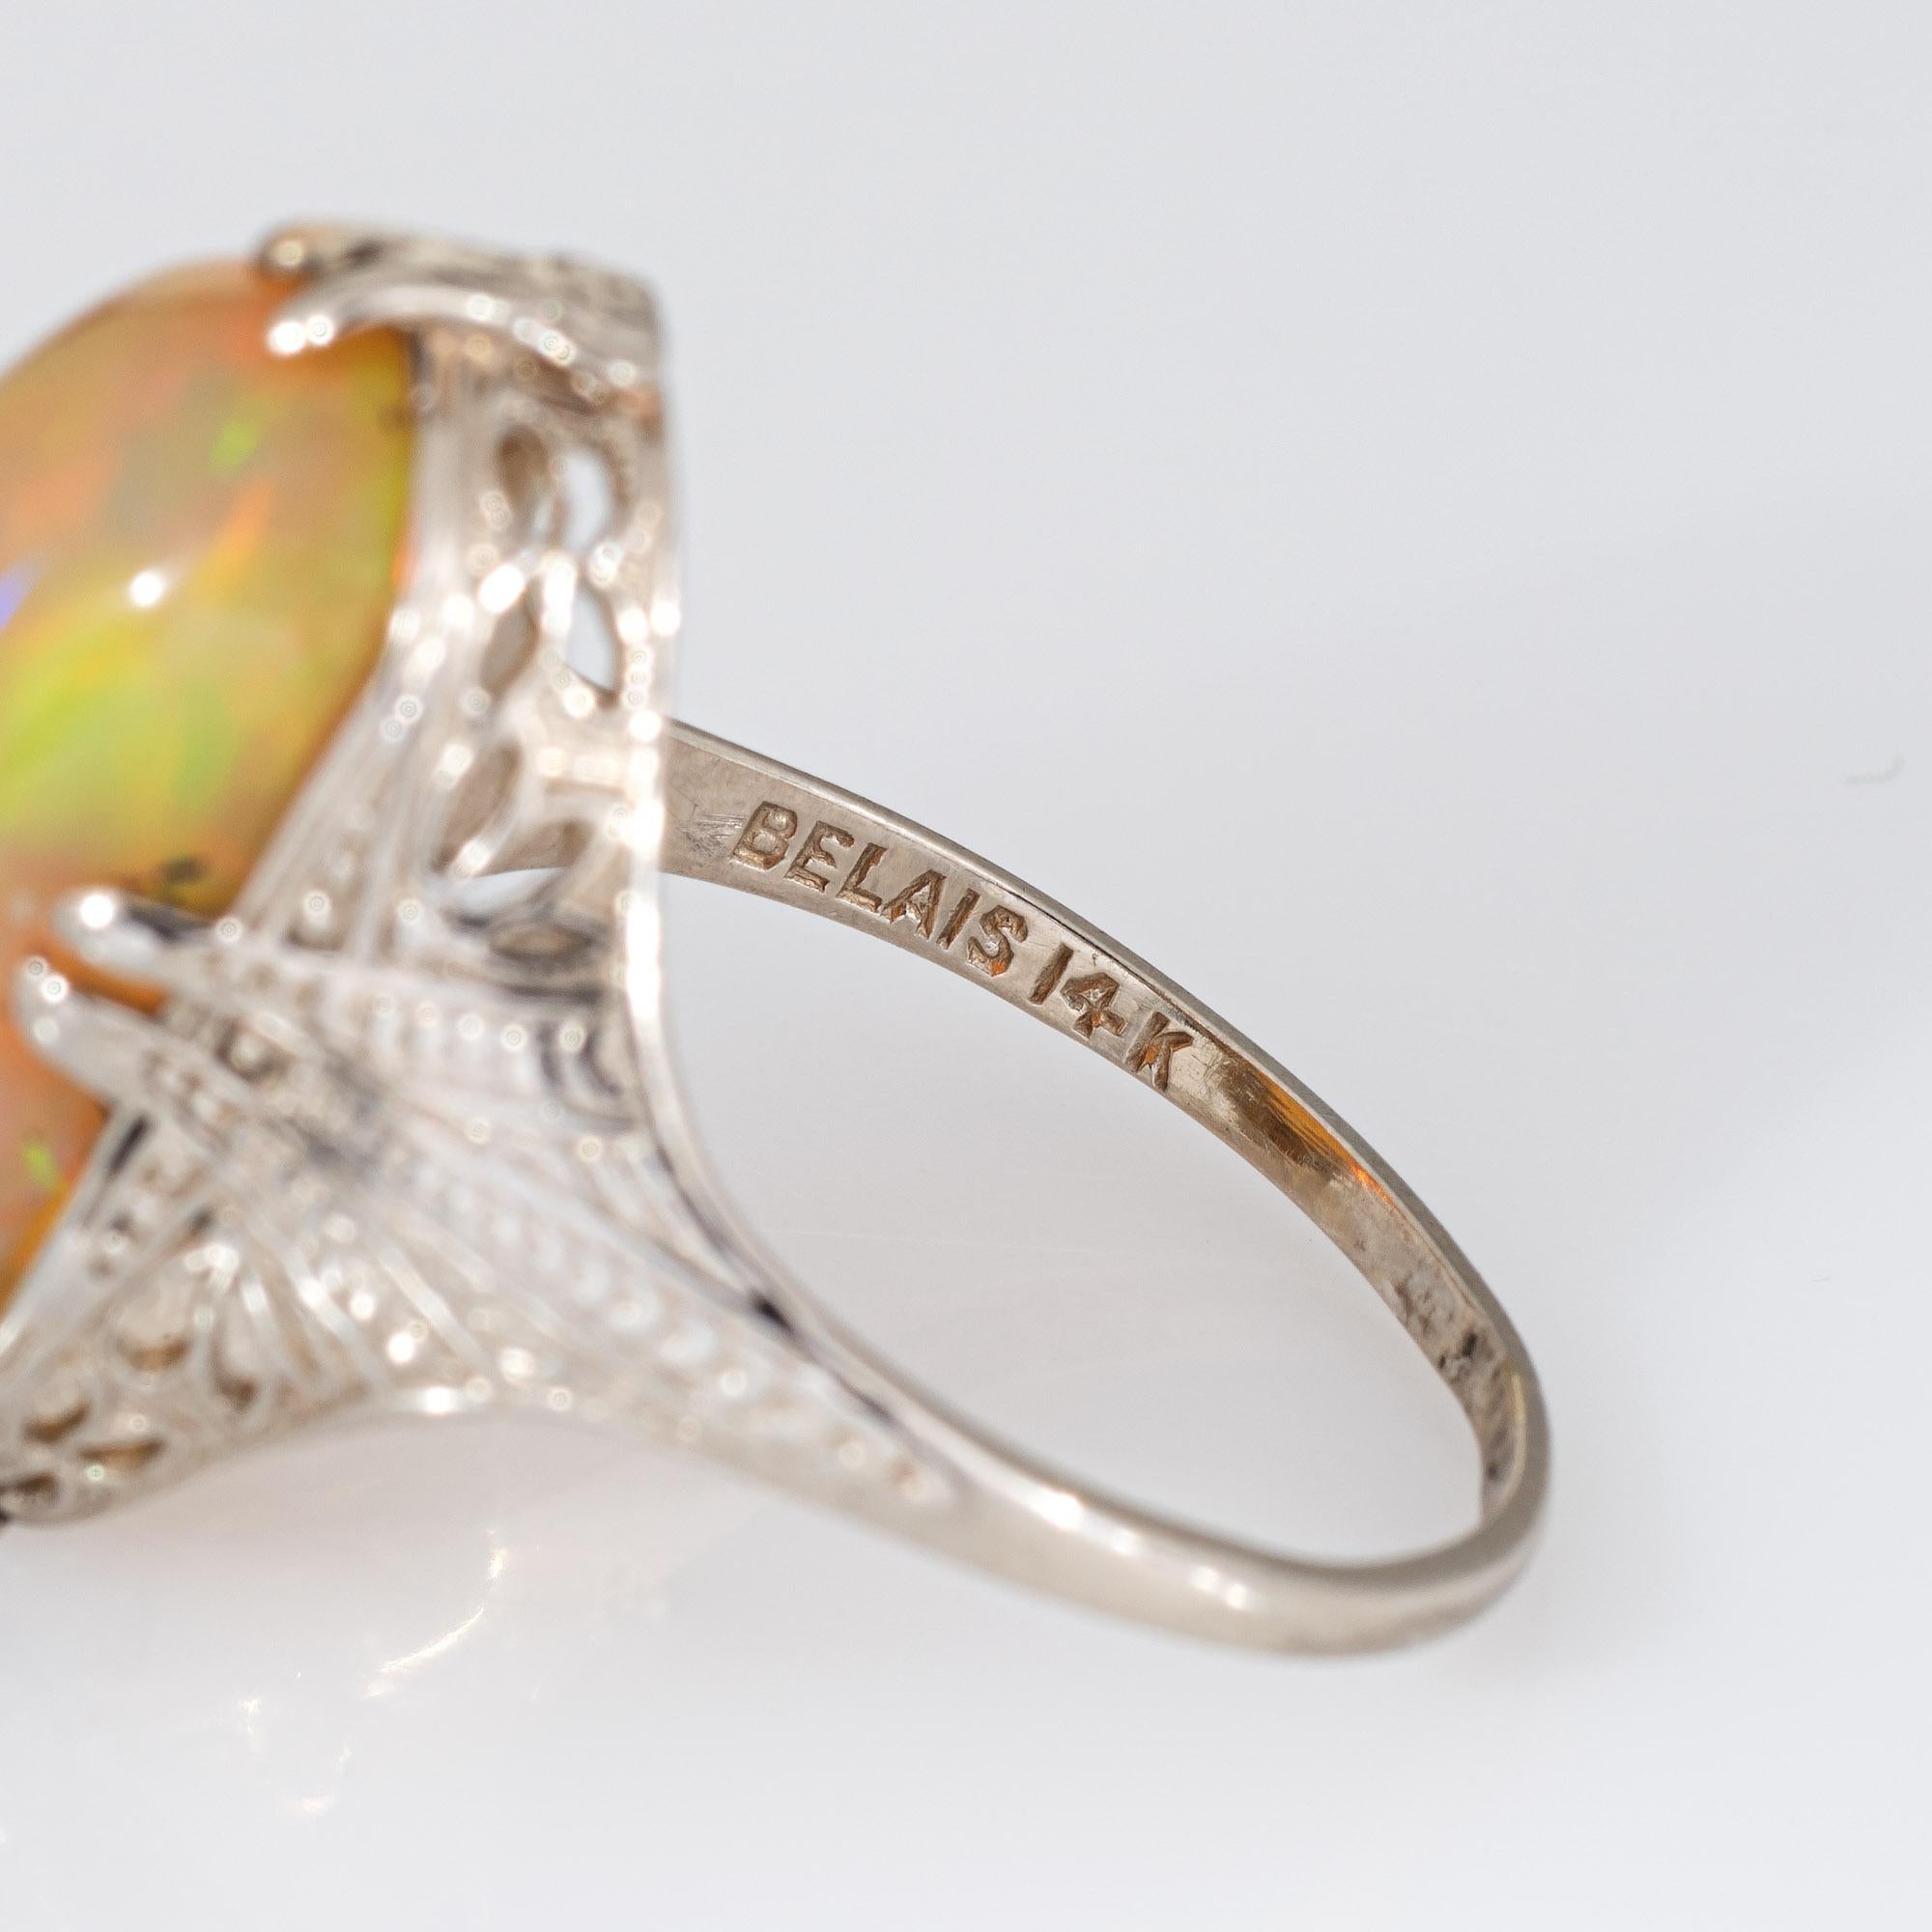 Vintage Belais Art Deco Opal Ring 14k White Gold Filigree Fine Jewelry In Good Condition For Sale In Torrance, CA